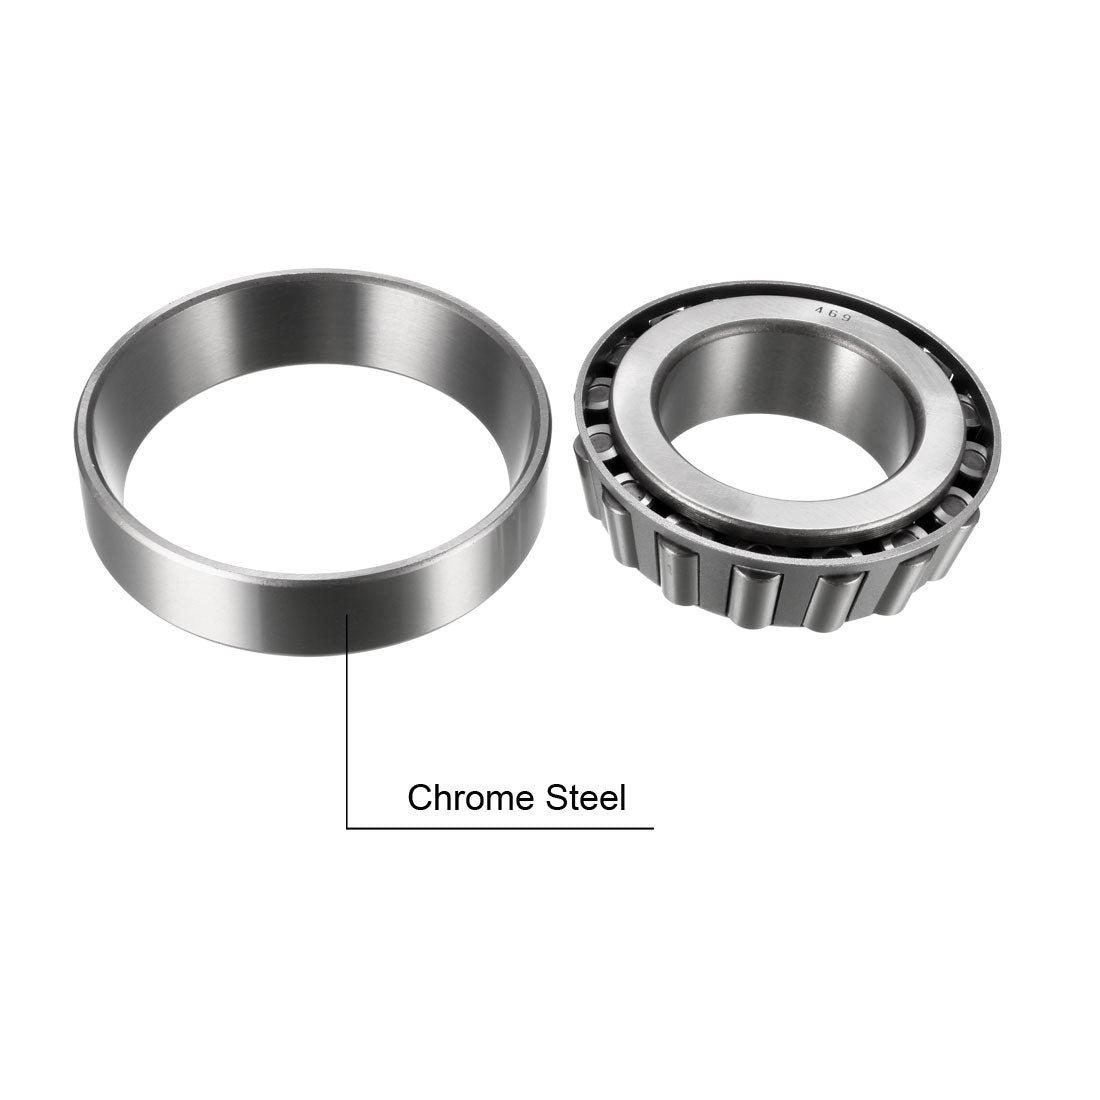 Uxcell Uxcell 390A/394A Tapered Roller Bearing Cone and Cup Set 2.5" Bore 4.3307" O.D.